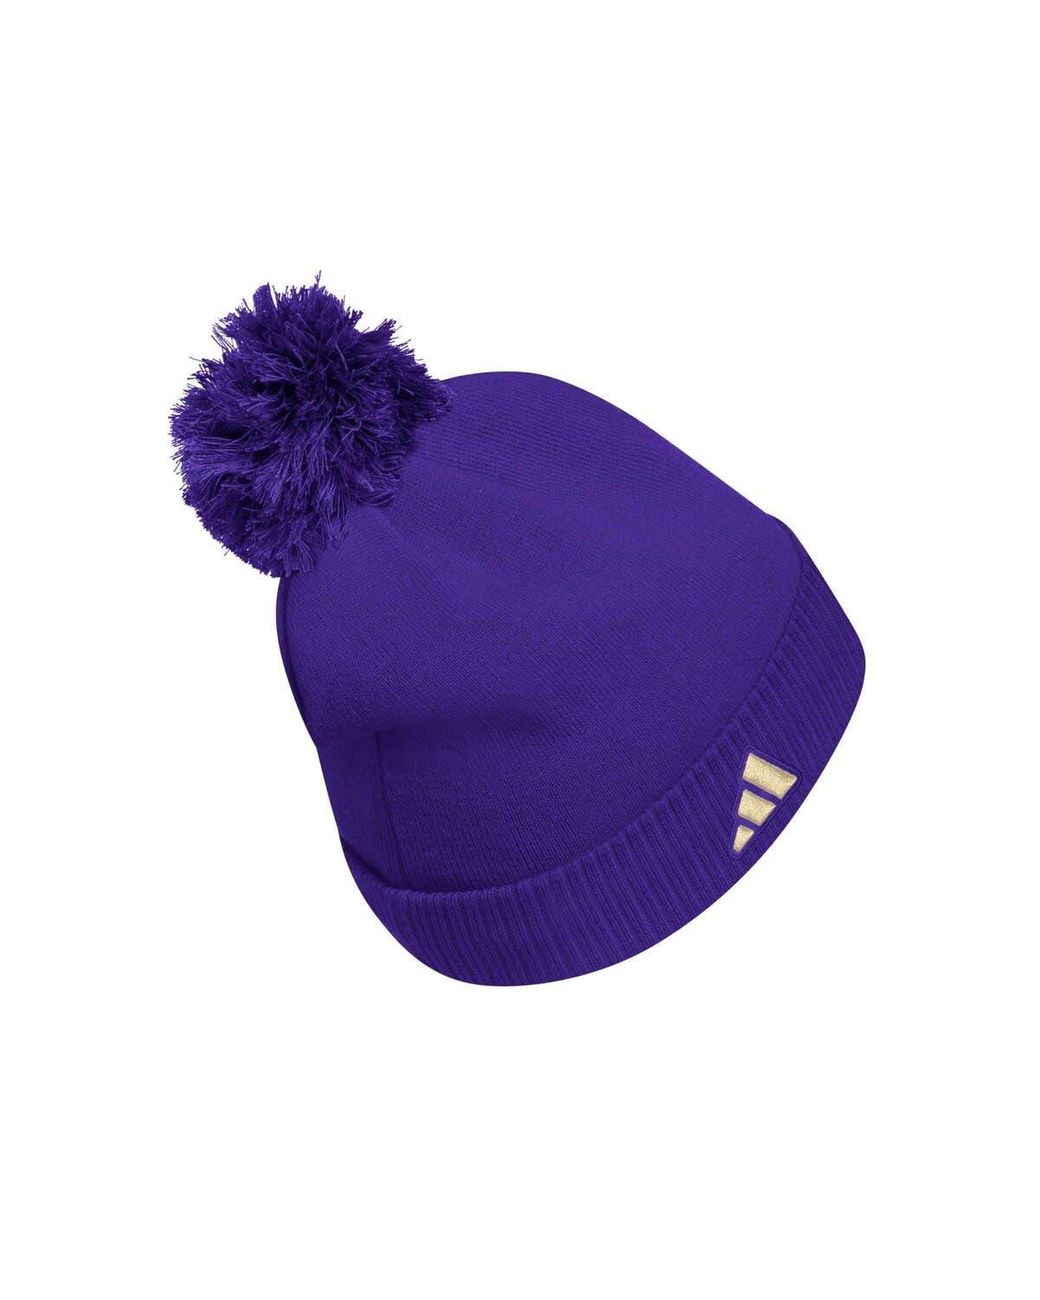 | Huskies Pom With At Lyst in Washington Sideline adidas Rdy for Knit Men Nordstrom Hat Purple 2023 Cold. Cuffed